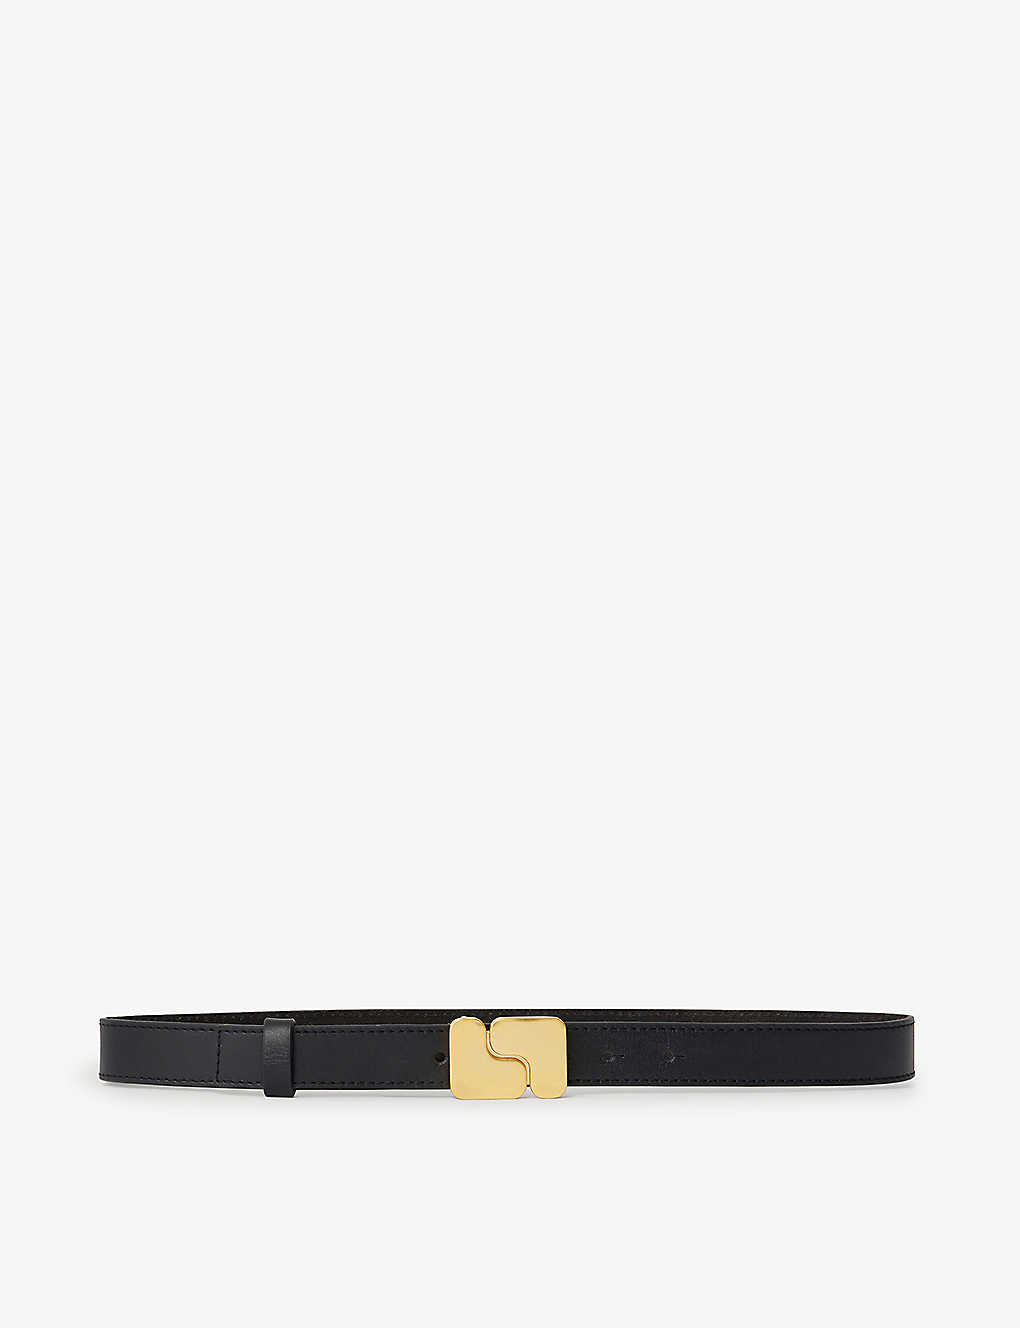 Logo Belts Are Back, and These Are the Designer Styles Everyone Is ...